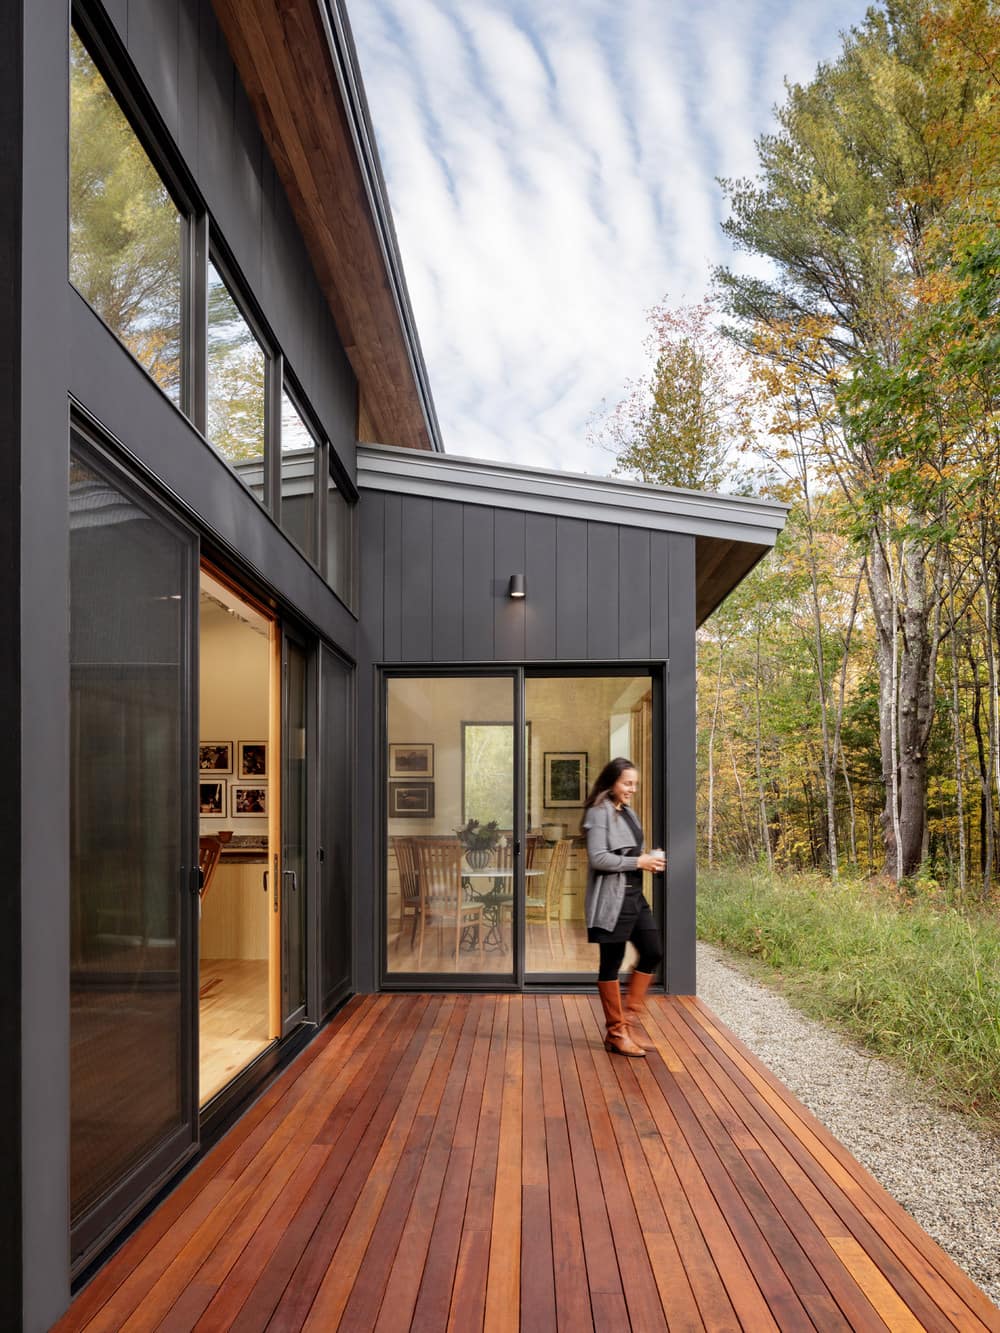 Royal River House - Efficient Single-Story Home by Briburn, Maine